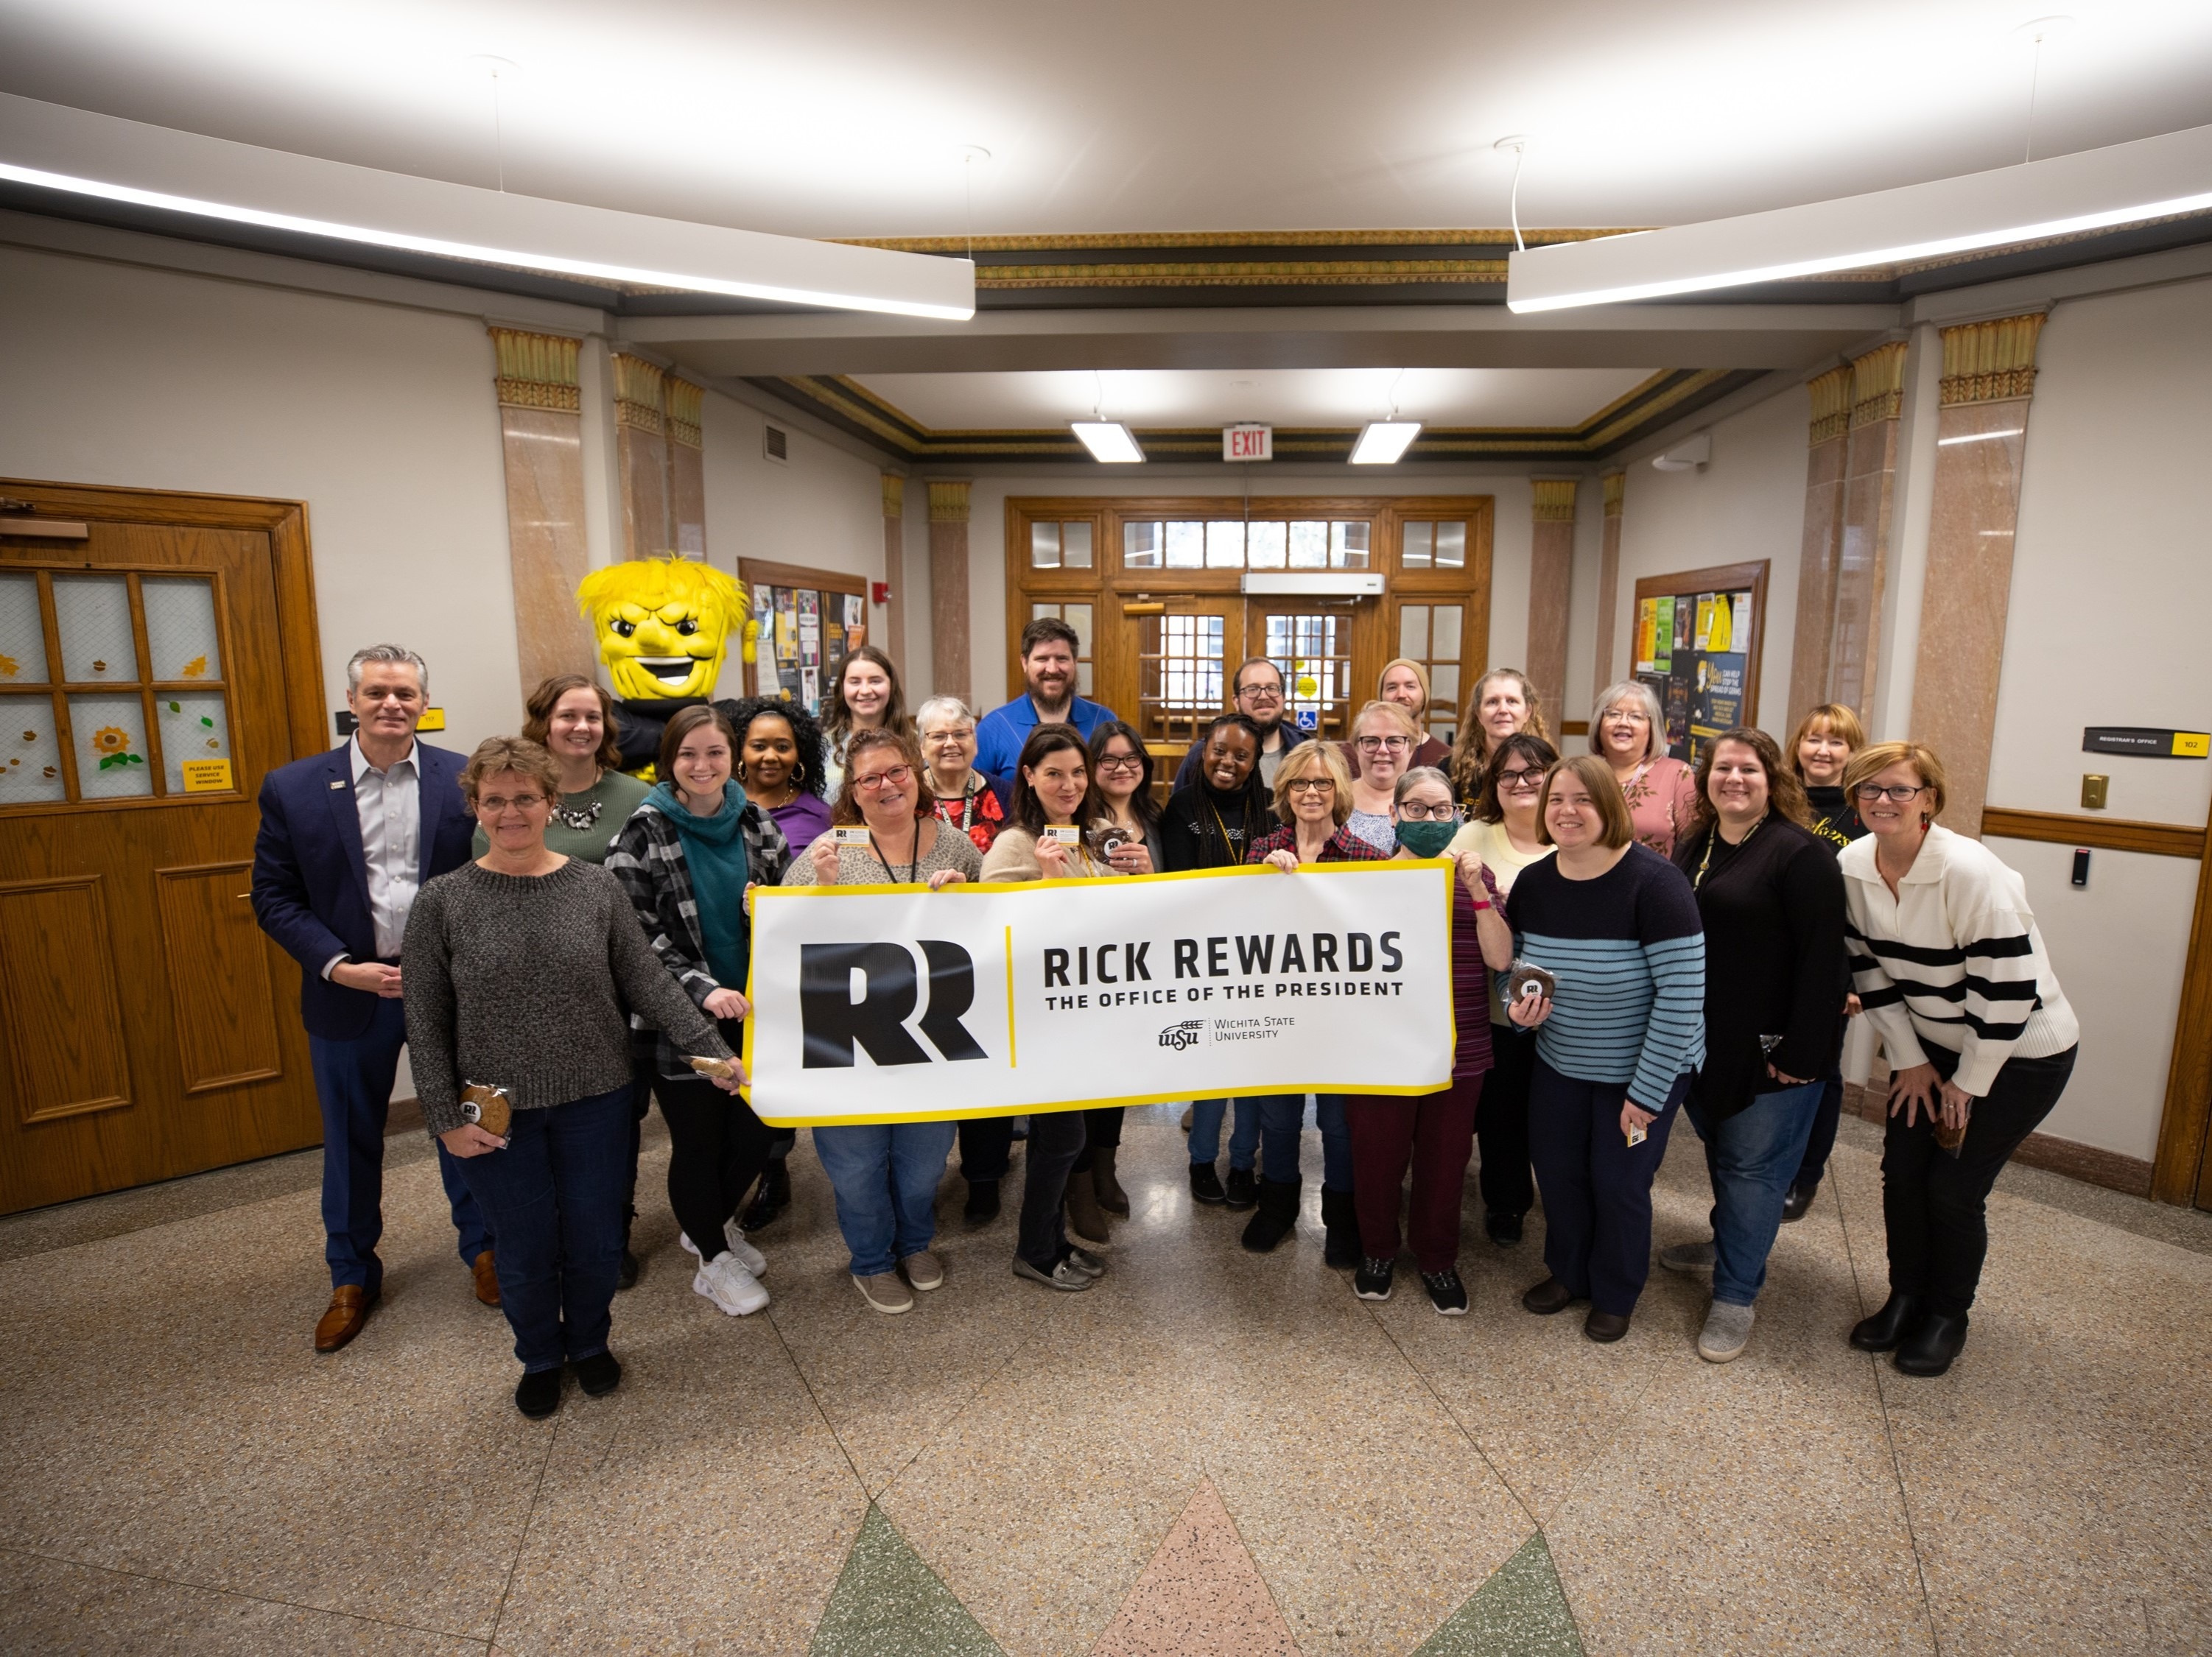 Photo of WSU President Dr. Rick Muma and various other employees presenting a "Rick Rewards" banner. 